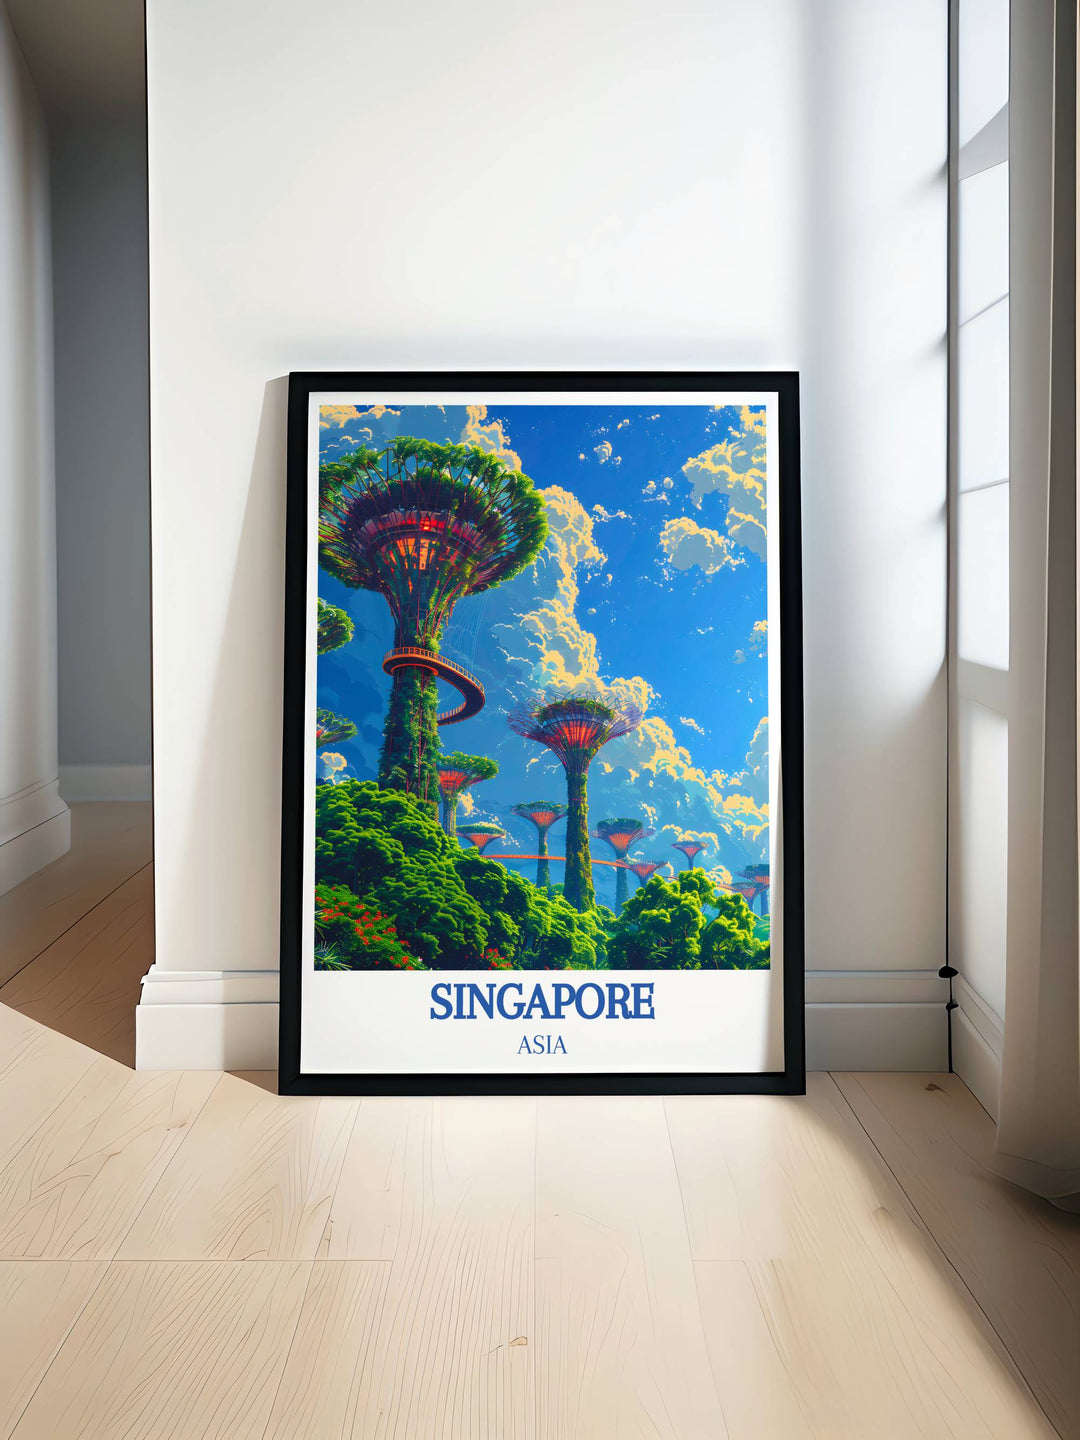 Vibrant print of Gardens by the Bay in Singapore capturing the futuristic architecture and lush greenery, perfect for enhancing any room decor or as a unique gift item.